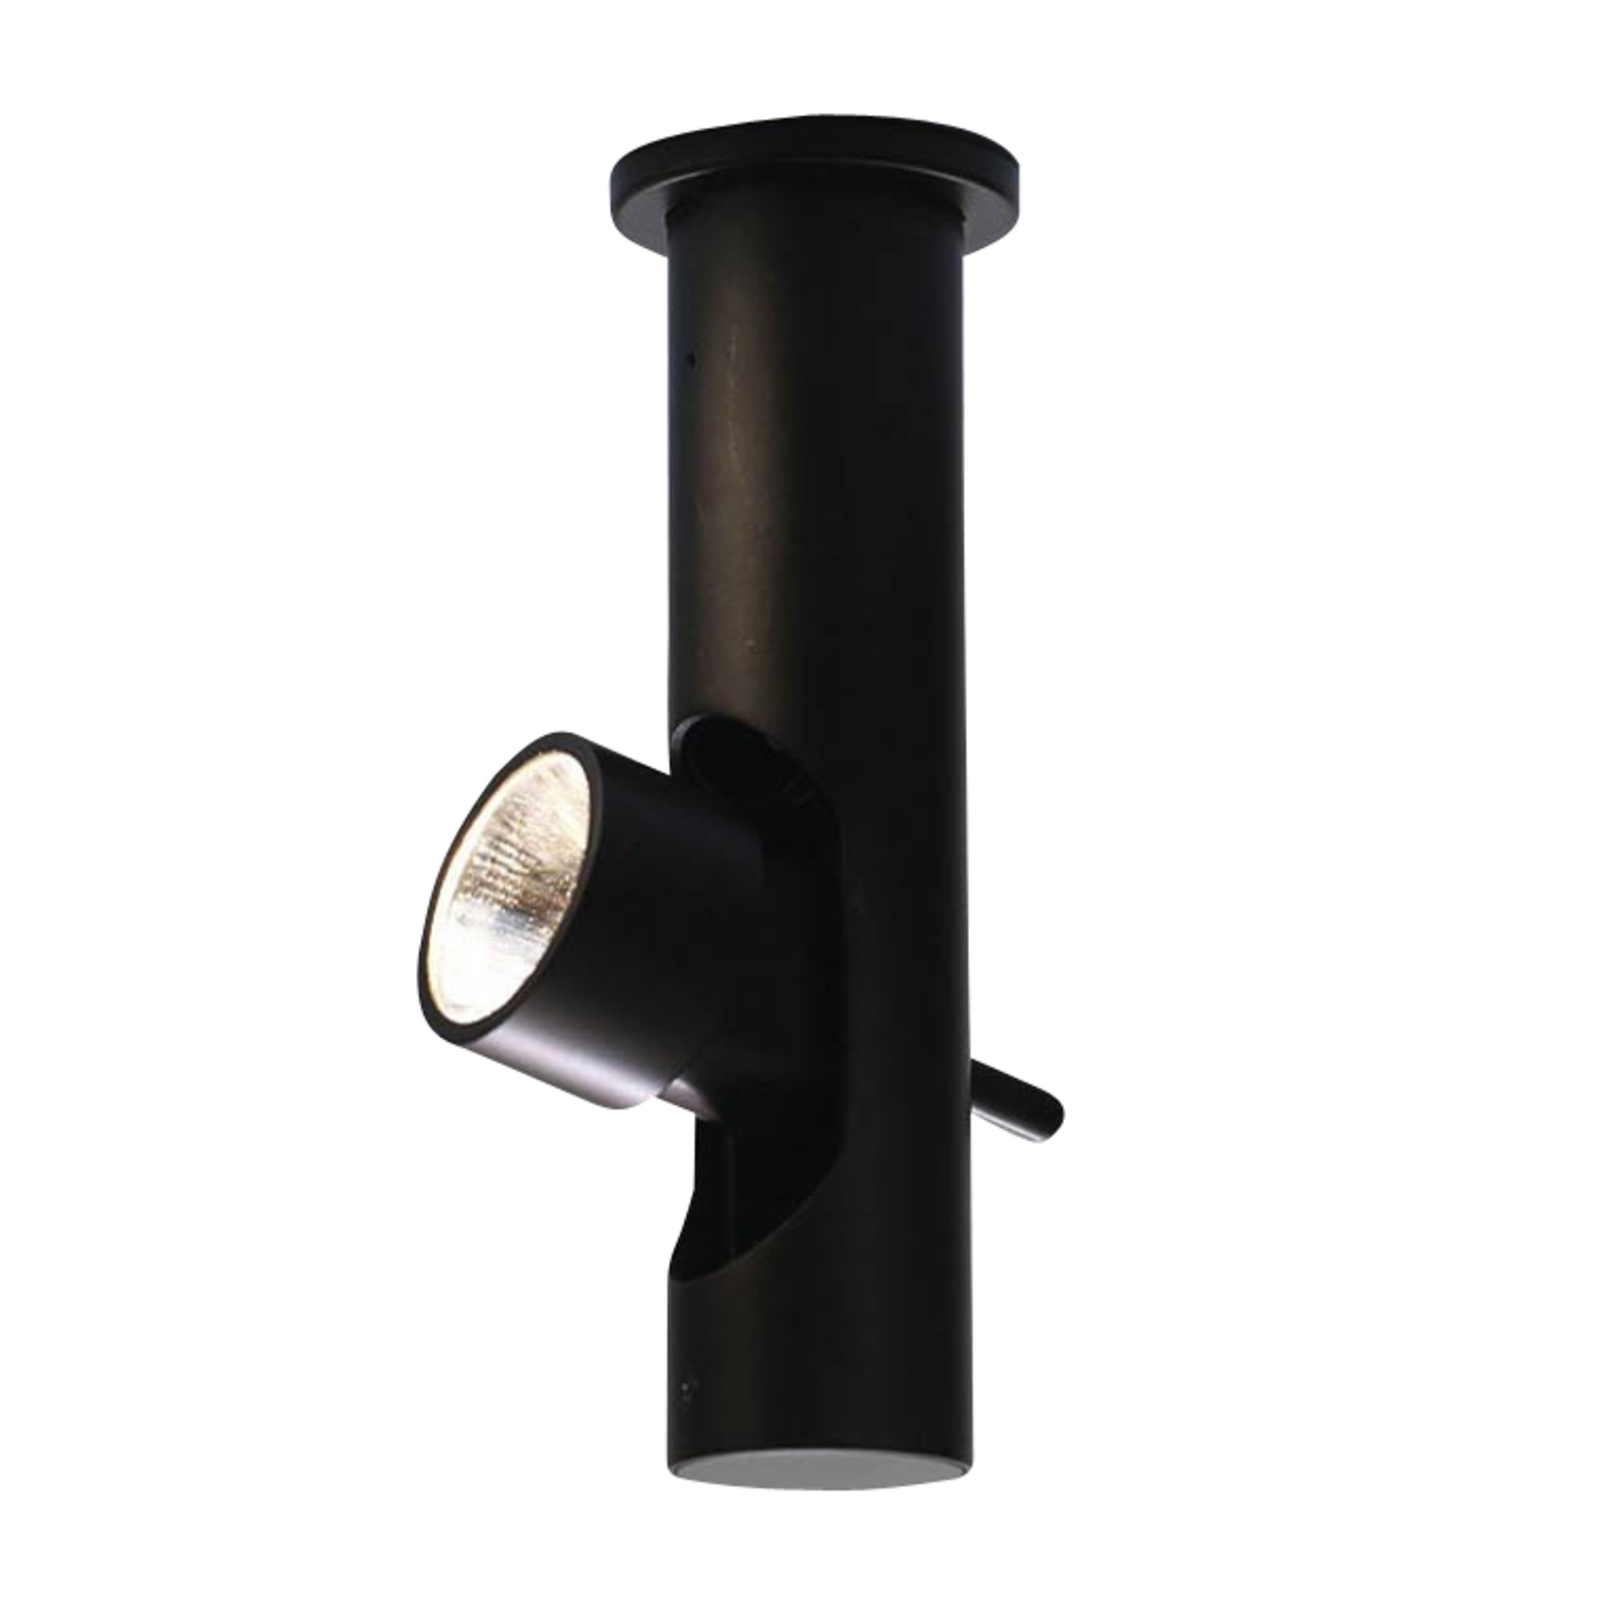 Martinelli Luce Calabrone spot LED-taklampe